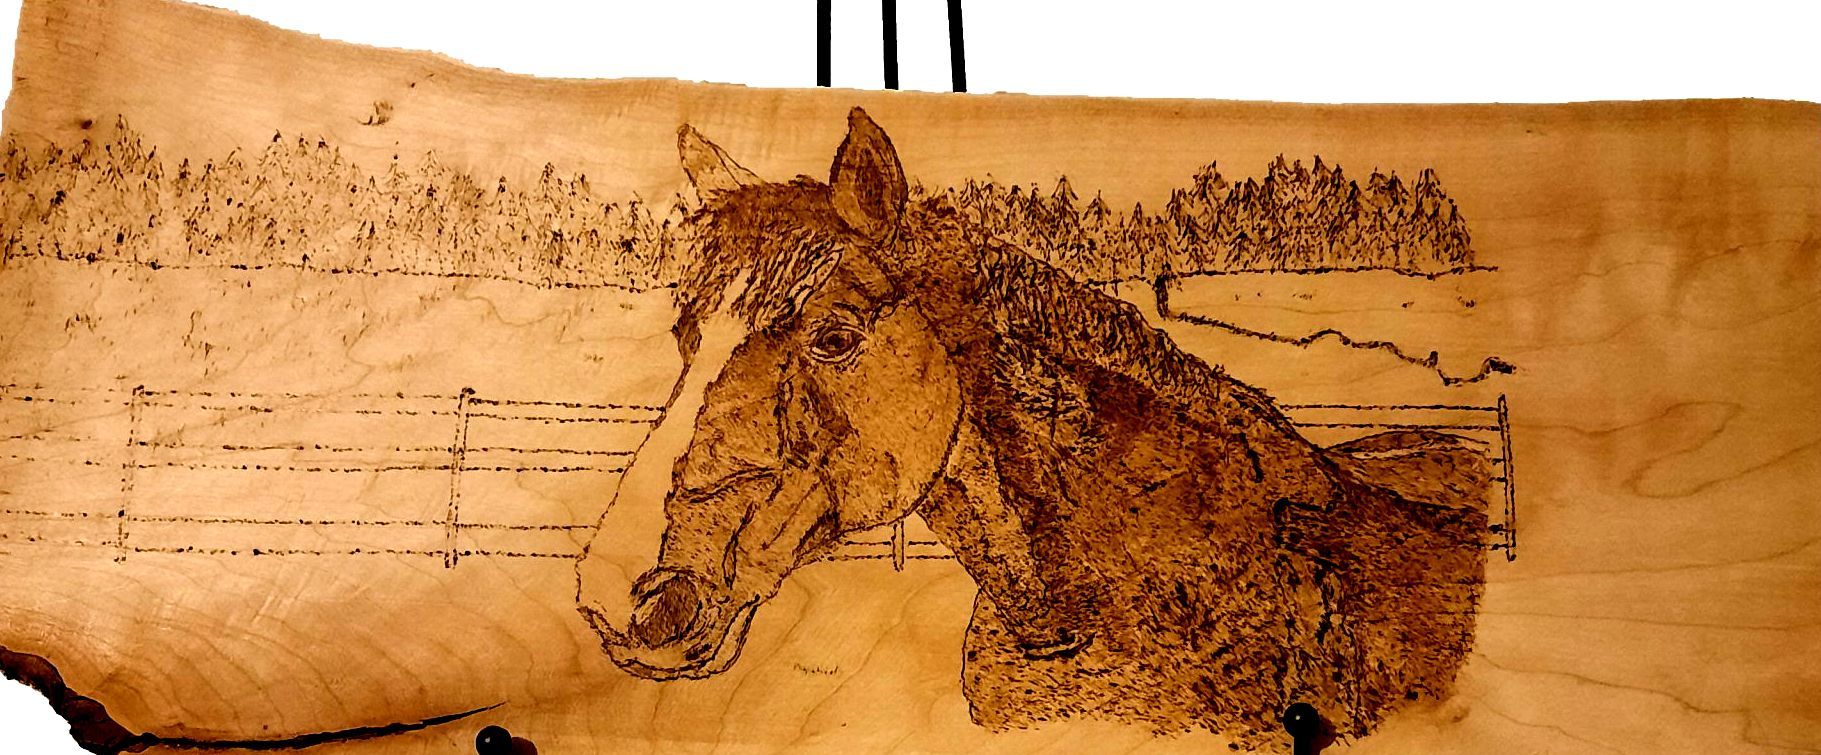 Horse, gate, horse riding, pyrography, wood, ornament